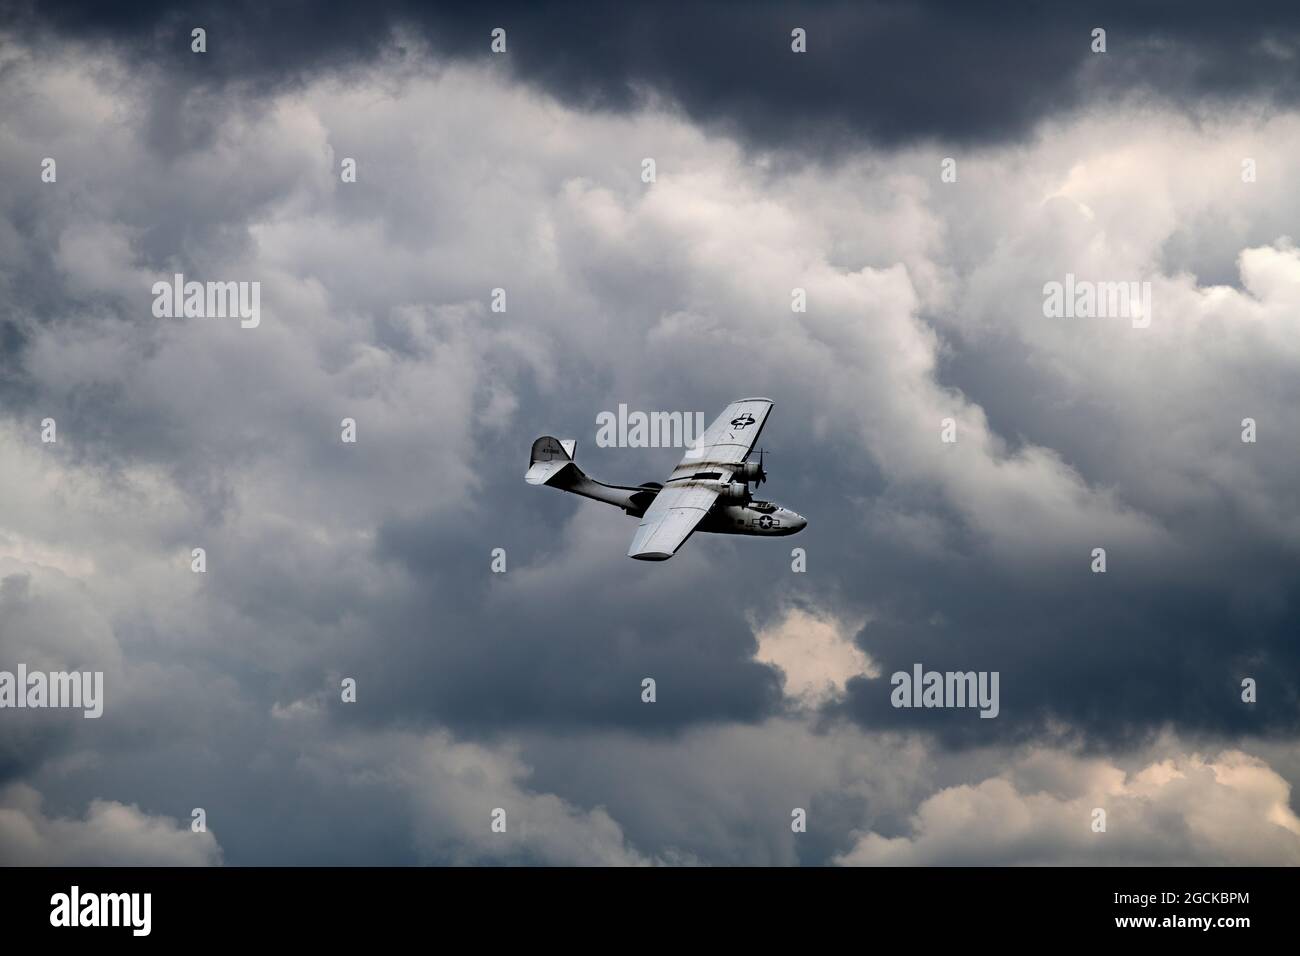 Duxford Imperial War Museum Photograph by Brian Harris 5 August 2021 IMW Duxford, Cambridgeshire England UK Catalina Flying Boat seen here flying over Stock Photo